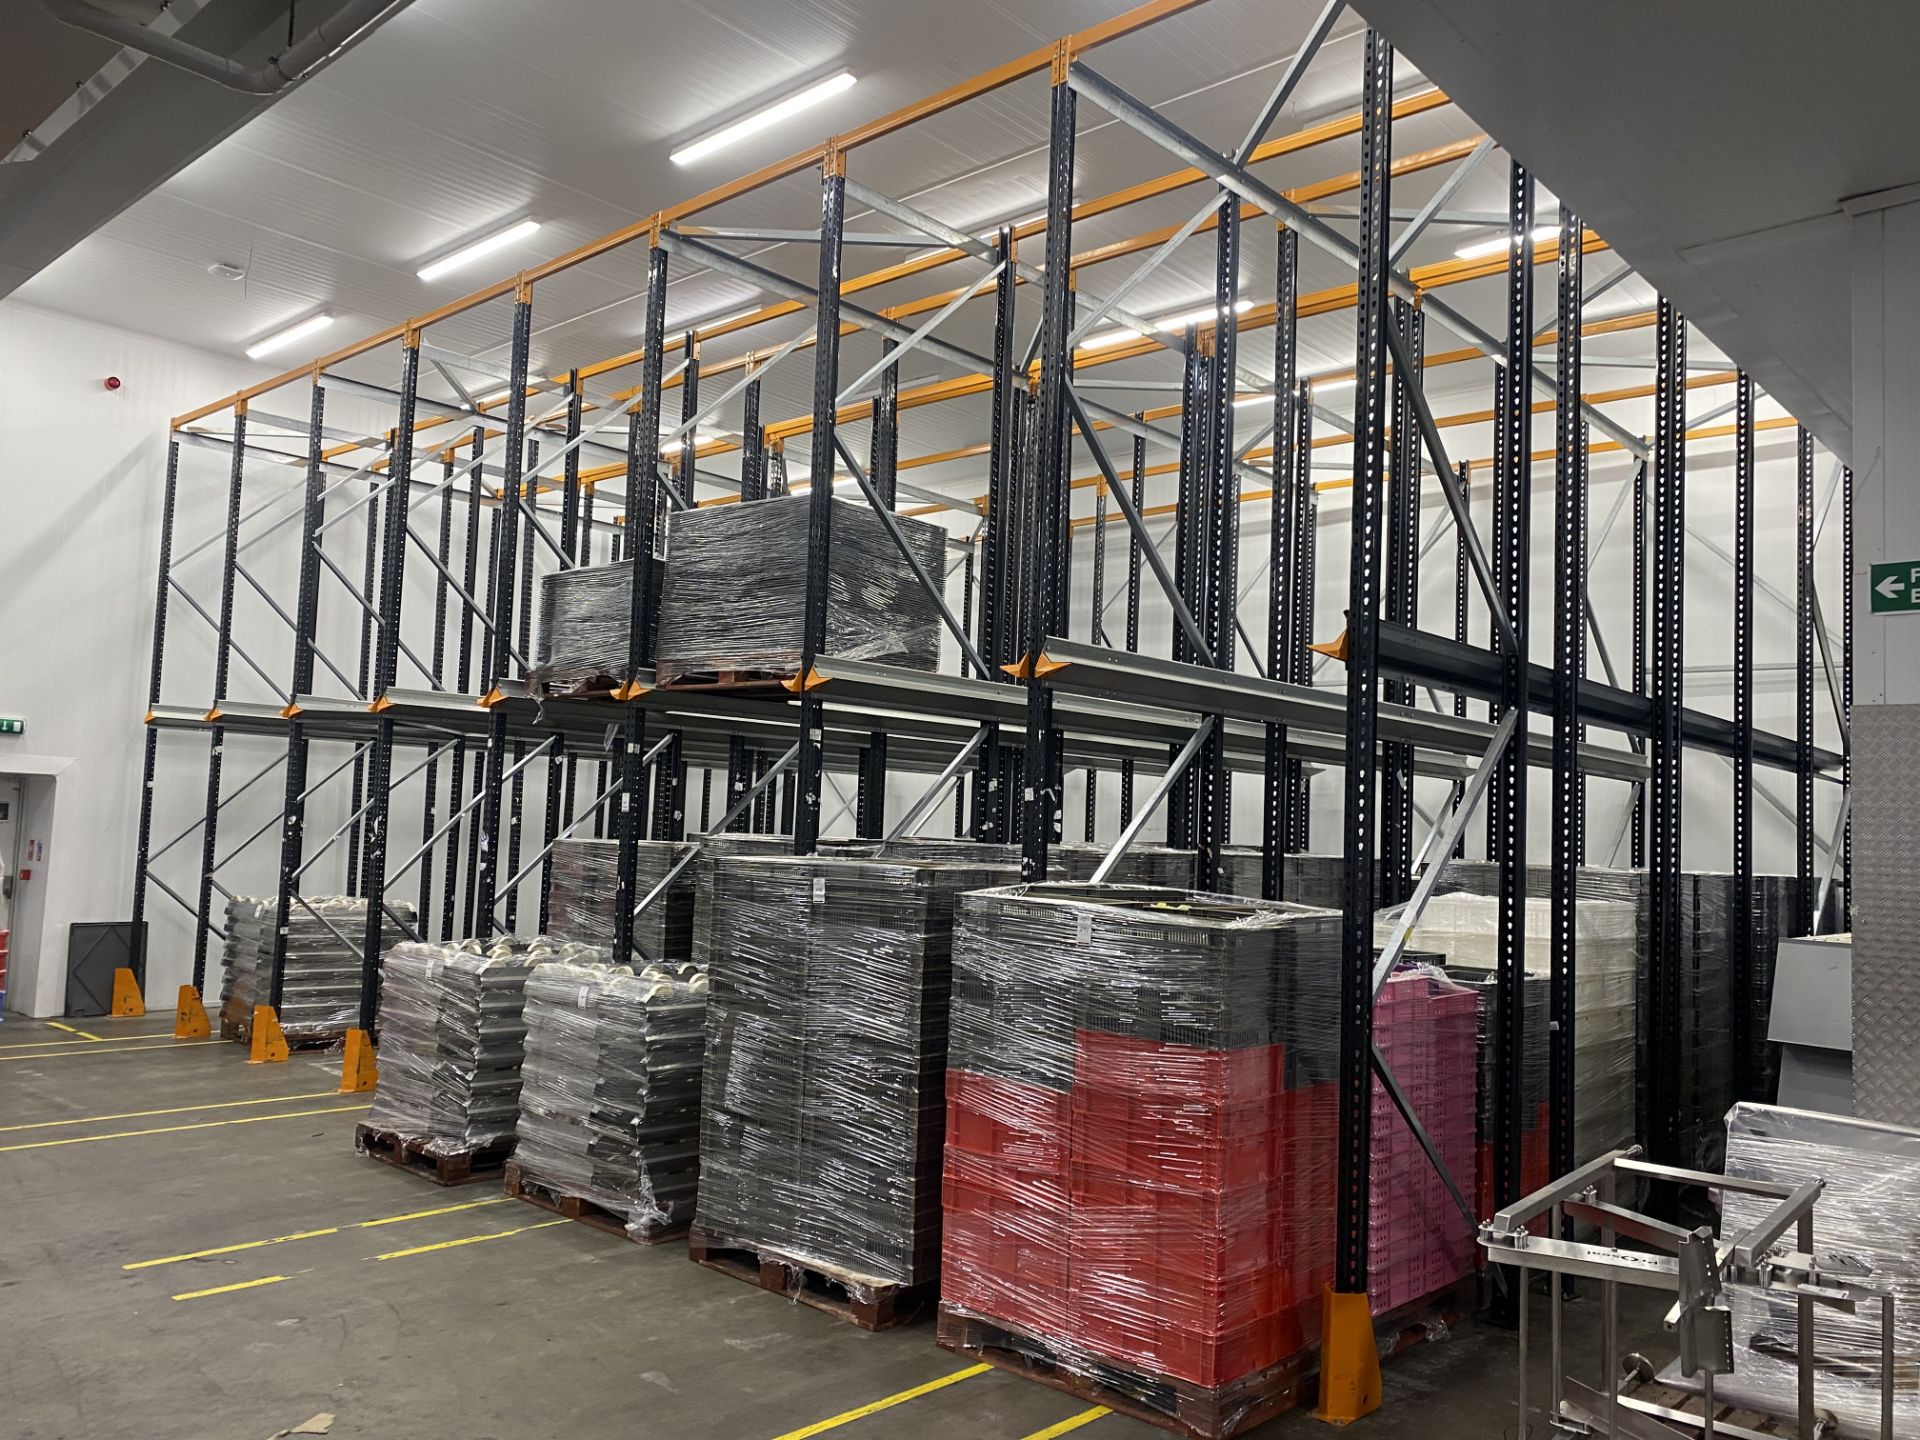 8 Bays of drive in heavy duty racking, 5m tall and